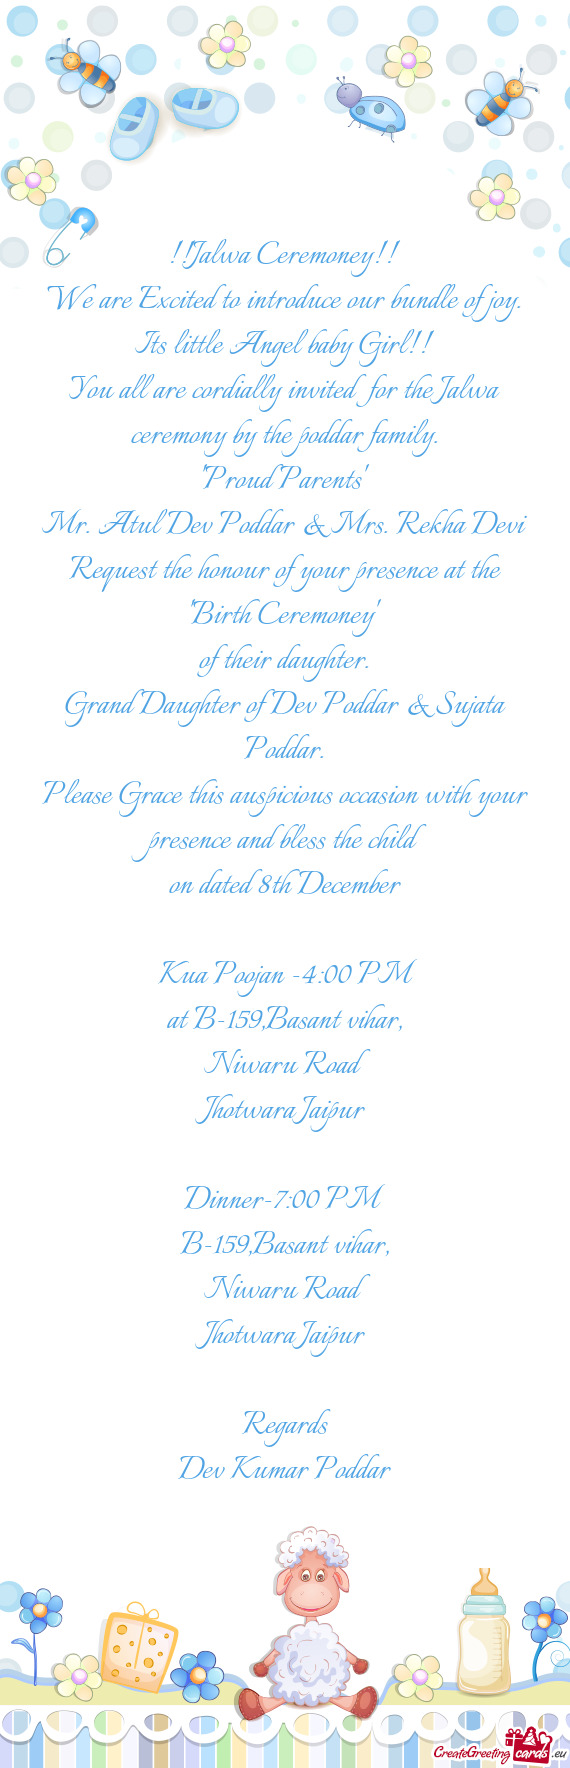 You all are cordially invited for the Jalwa ceremony by the poddar family